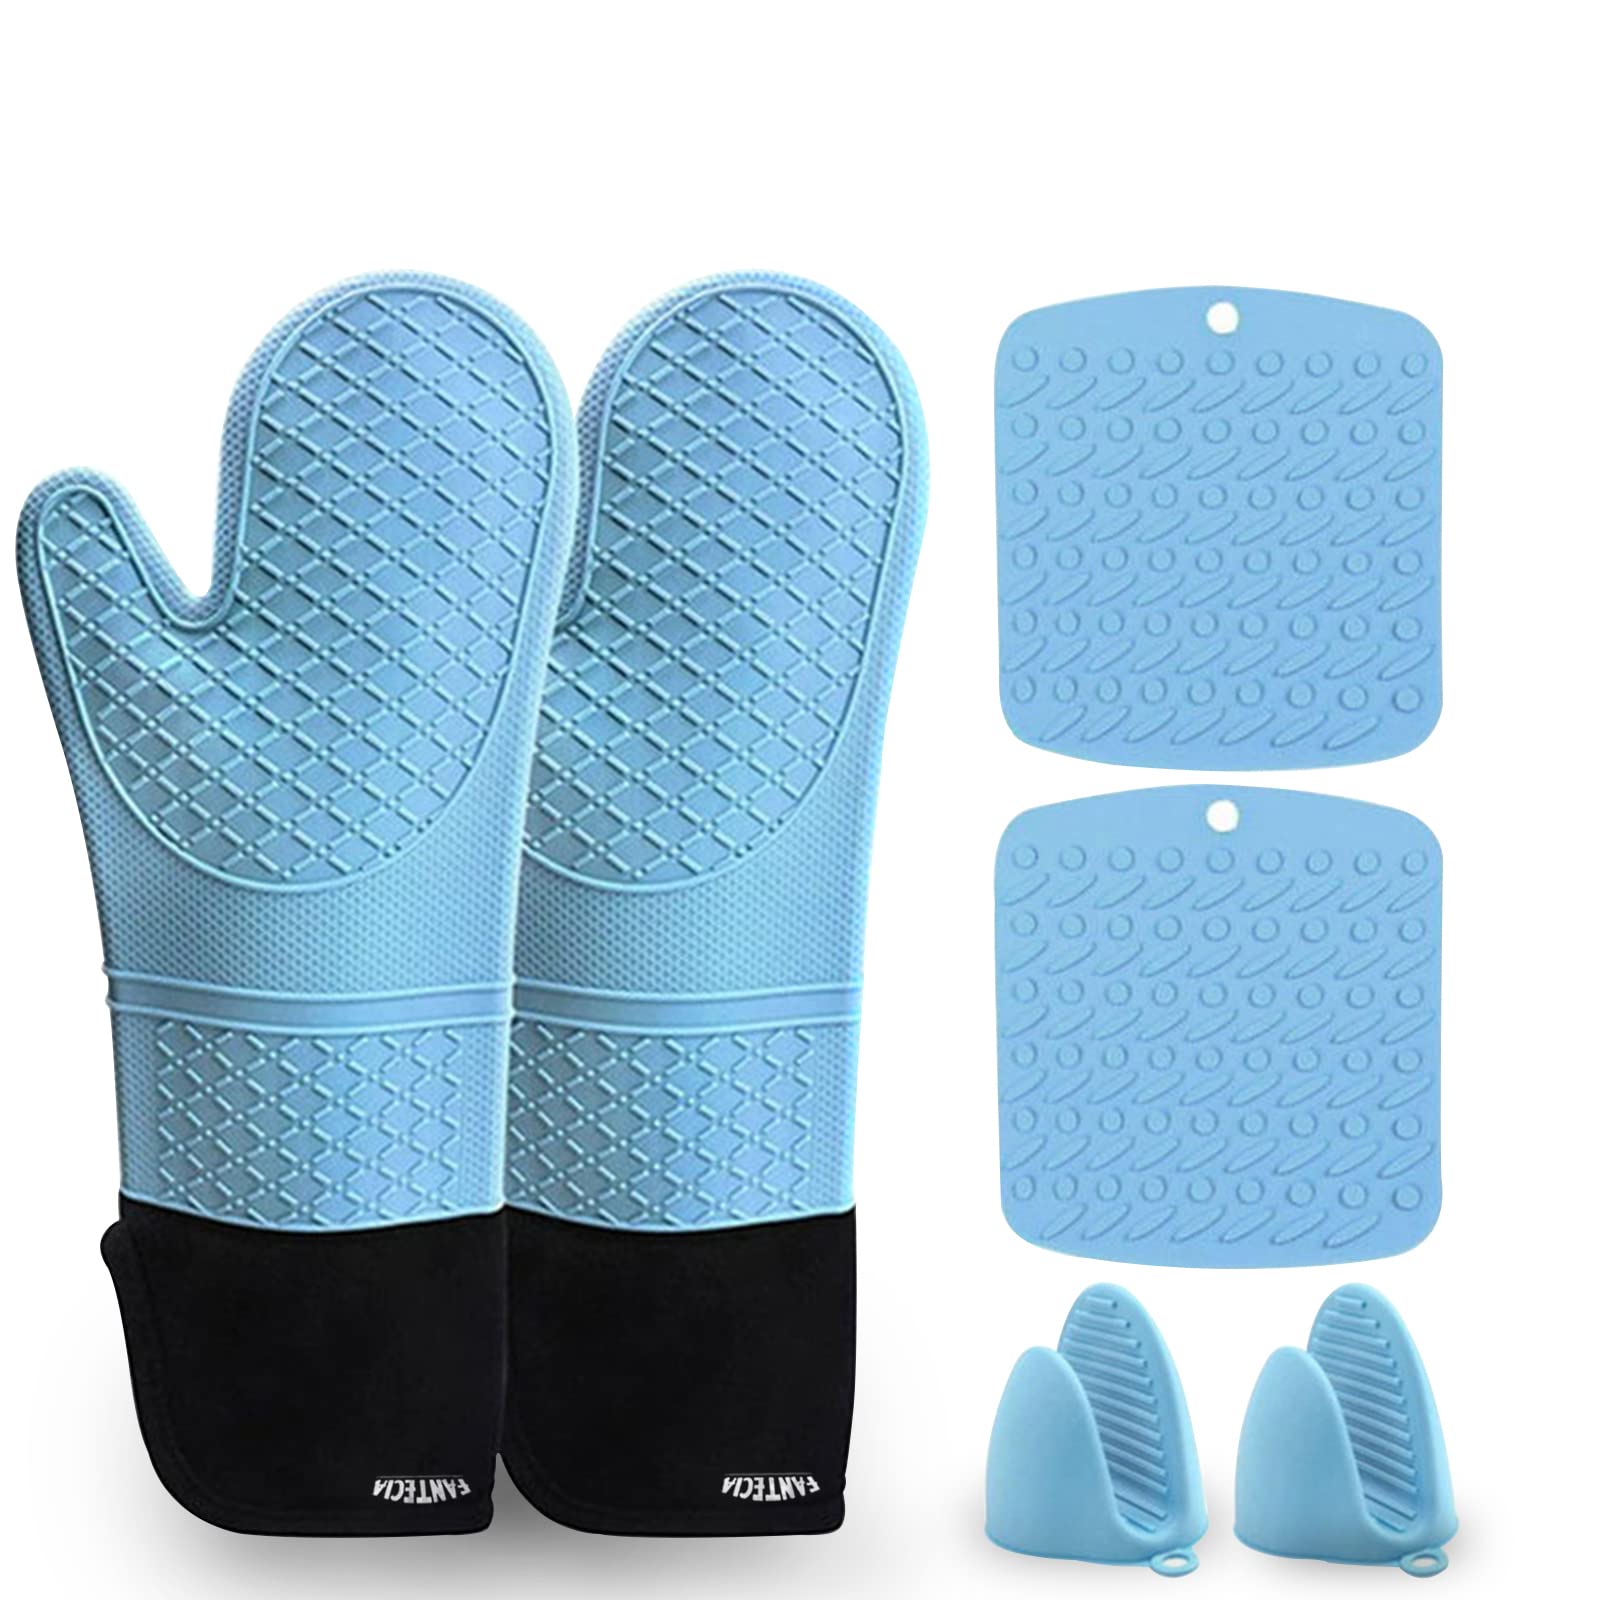 Fantecia Oven Mitt Set, Silicone Oven Mitts with Pot Holders and Trivet Mats, Heat Resistant, Anti-Slip and Easy to Clean